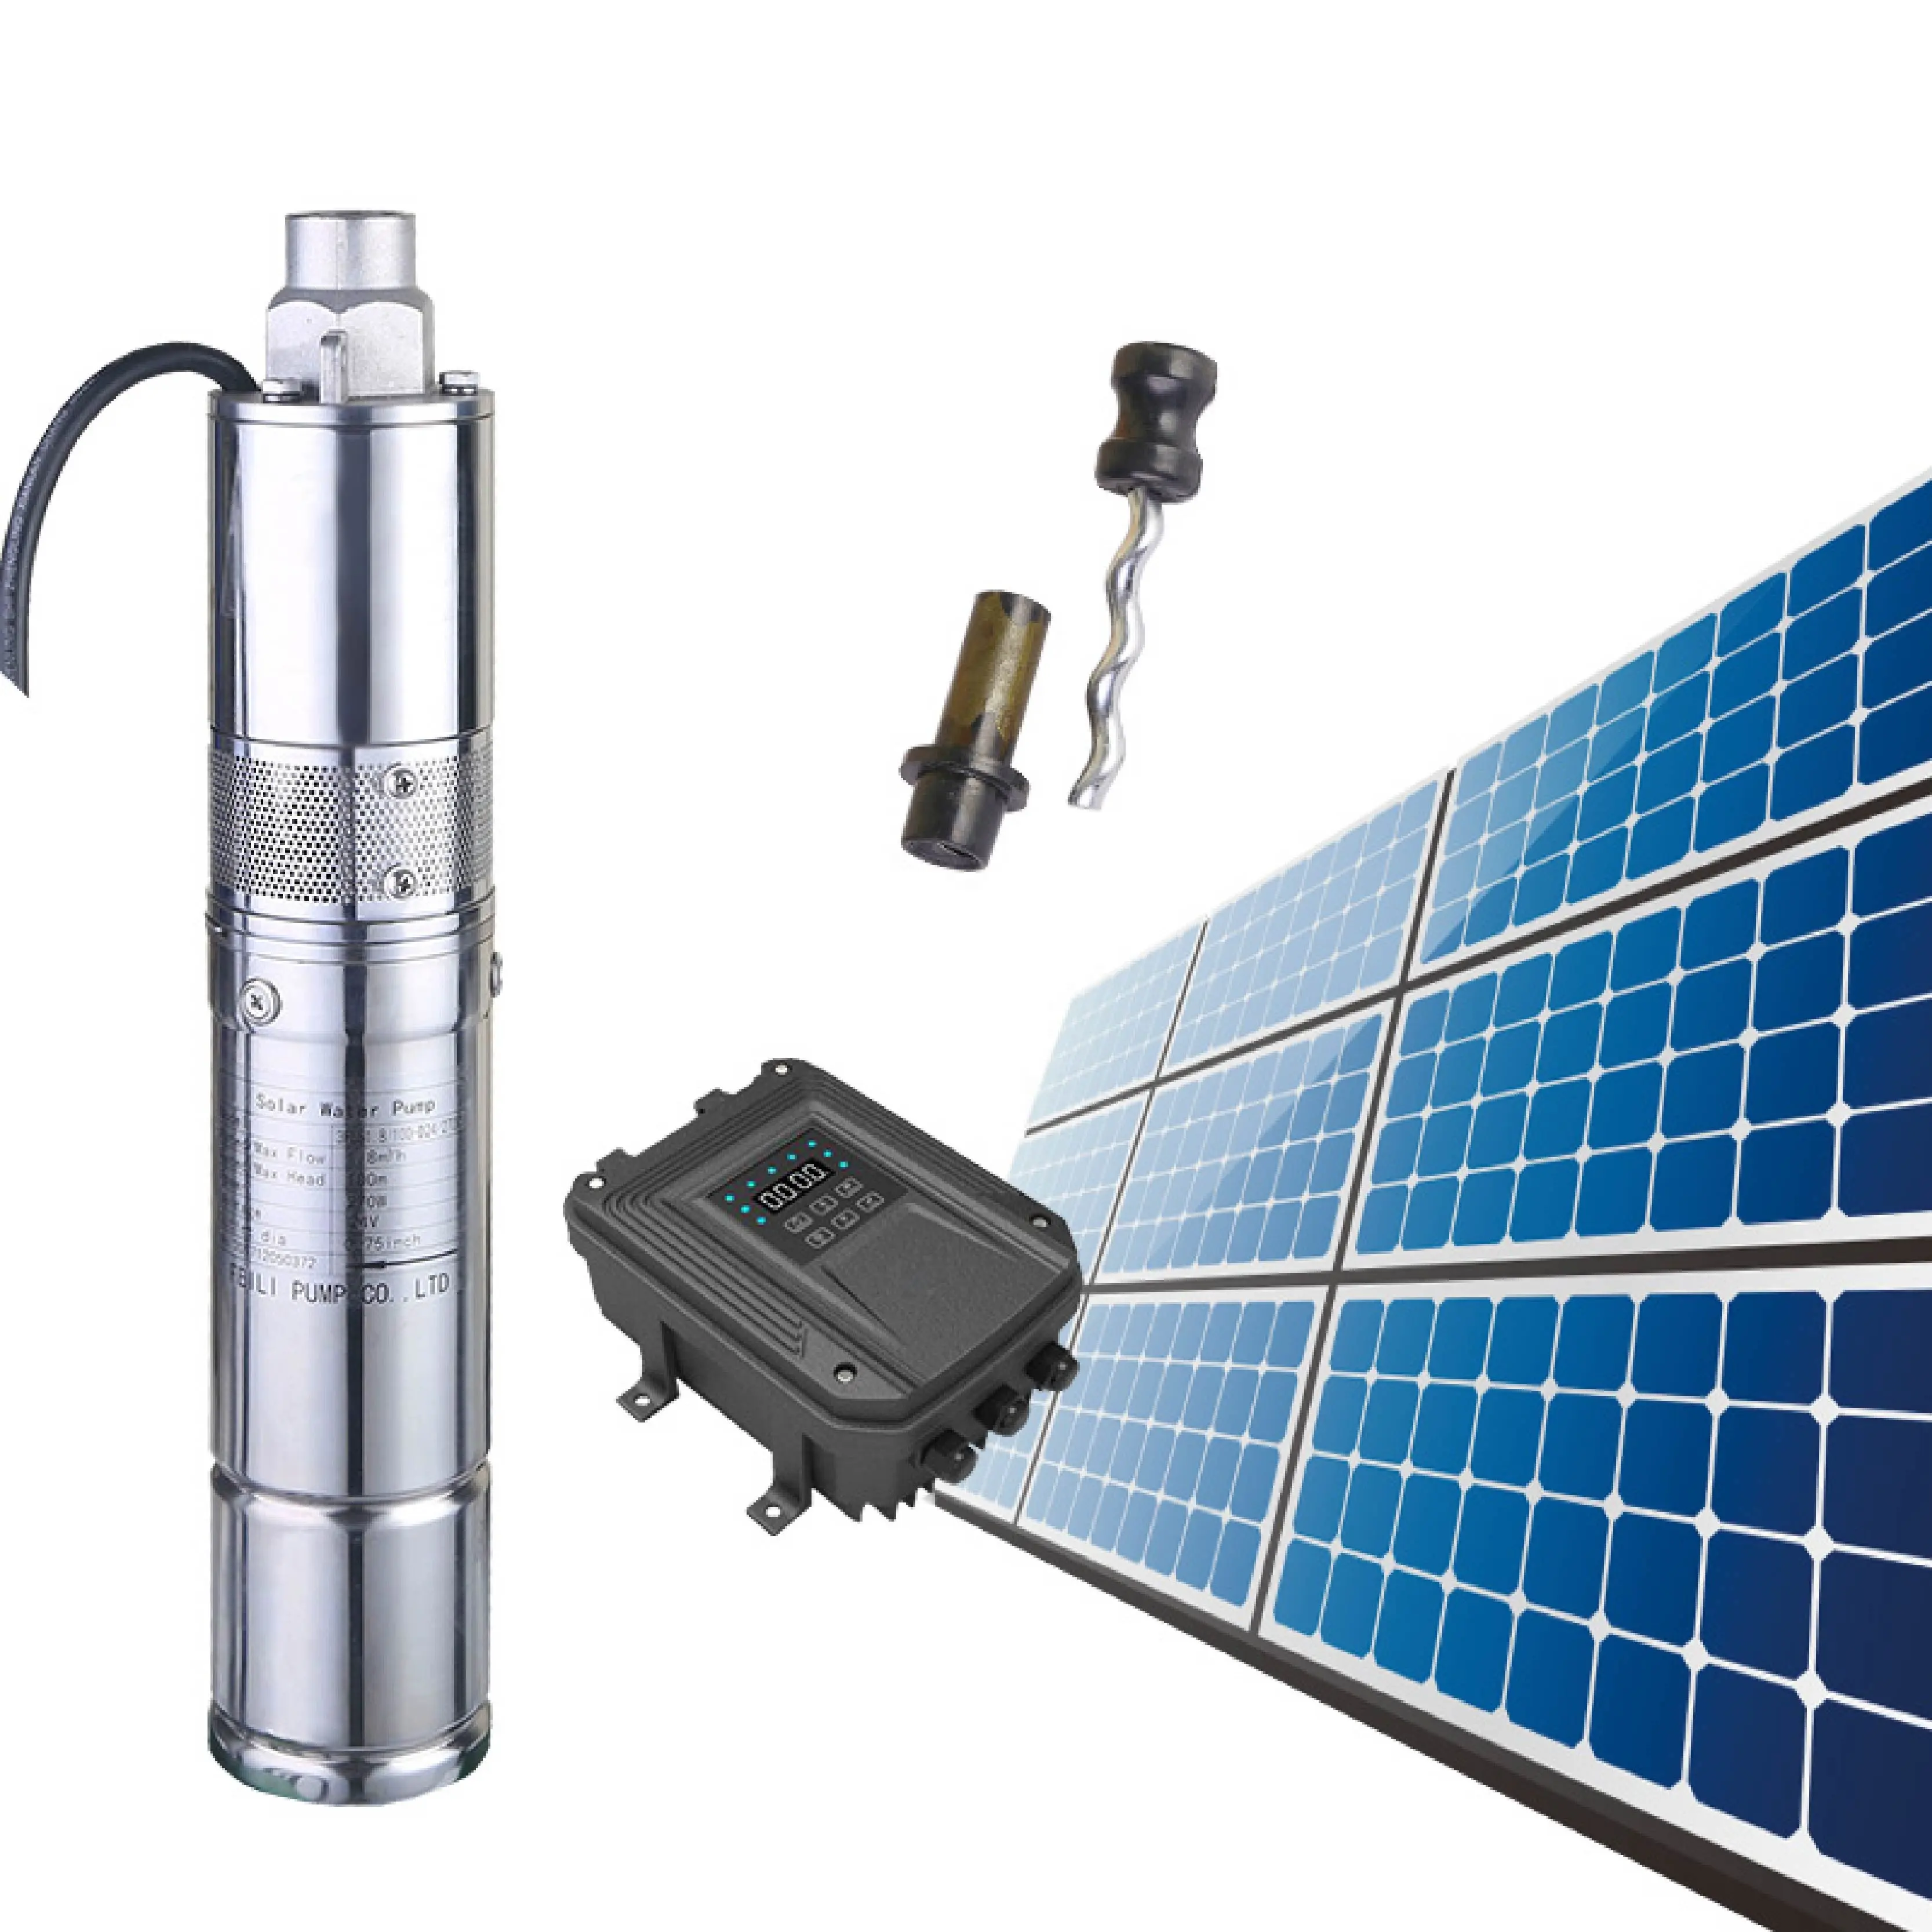 dc solar water pump zambia solar pond pump for fish pond solar water pump submersible